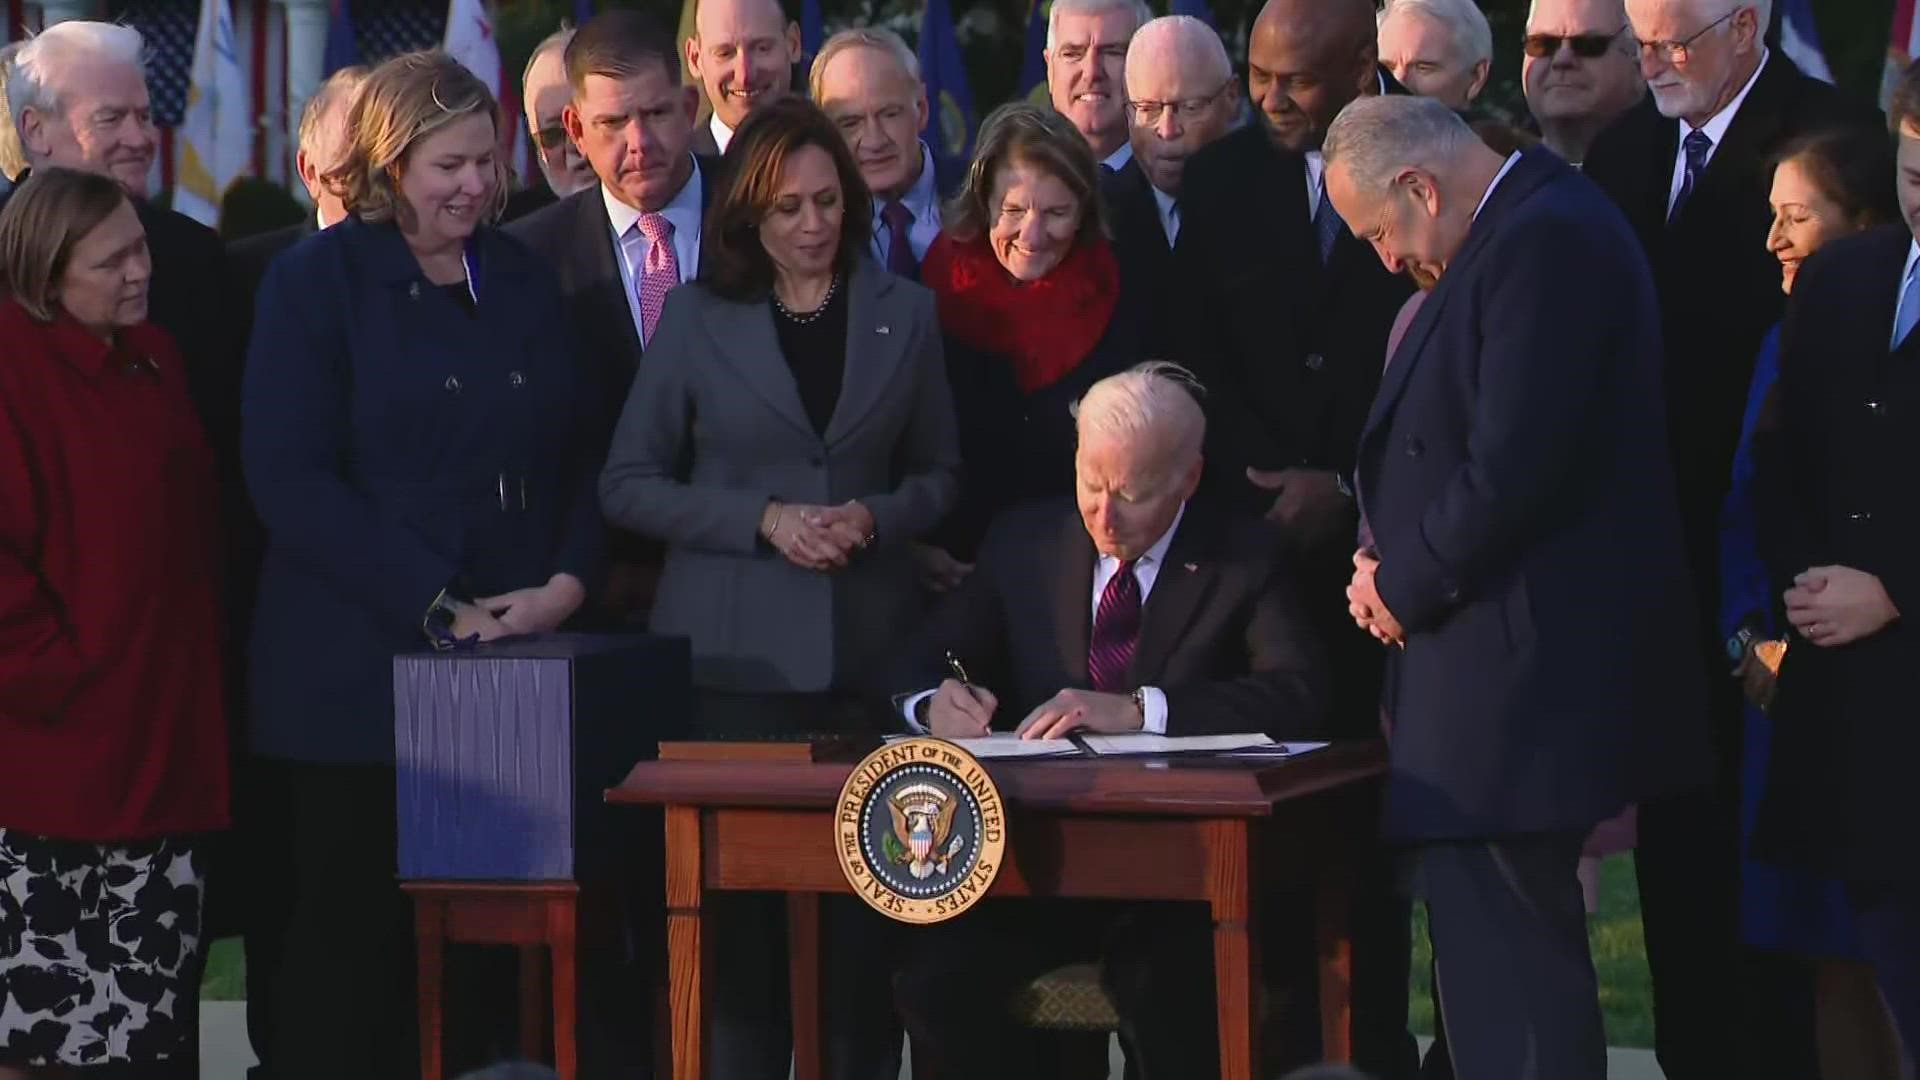 Biden signed the $1 trillion bipartisan infrastructure bill into law during a ceremony Monday afternoon on the South Lawn of the White House in Washington.